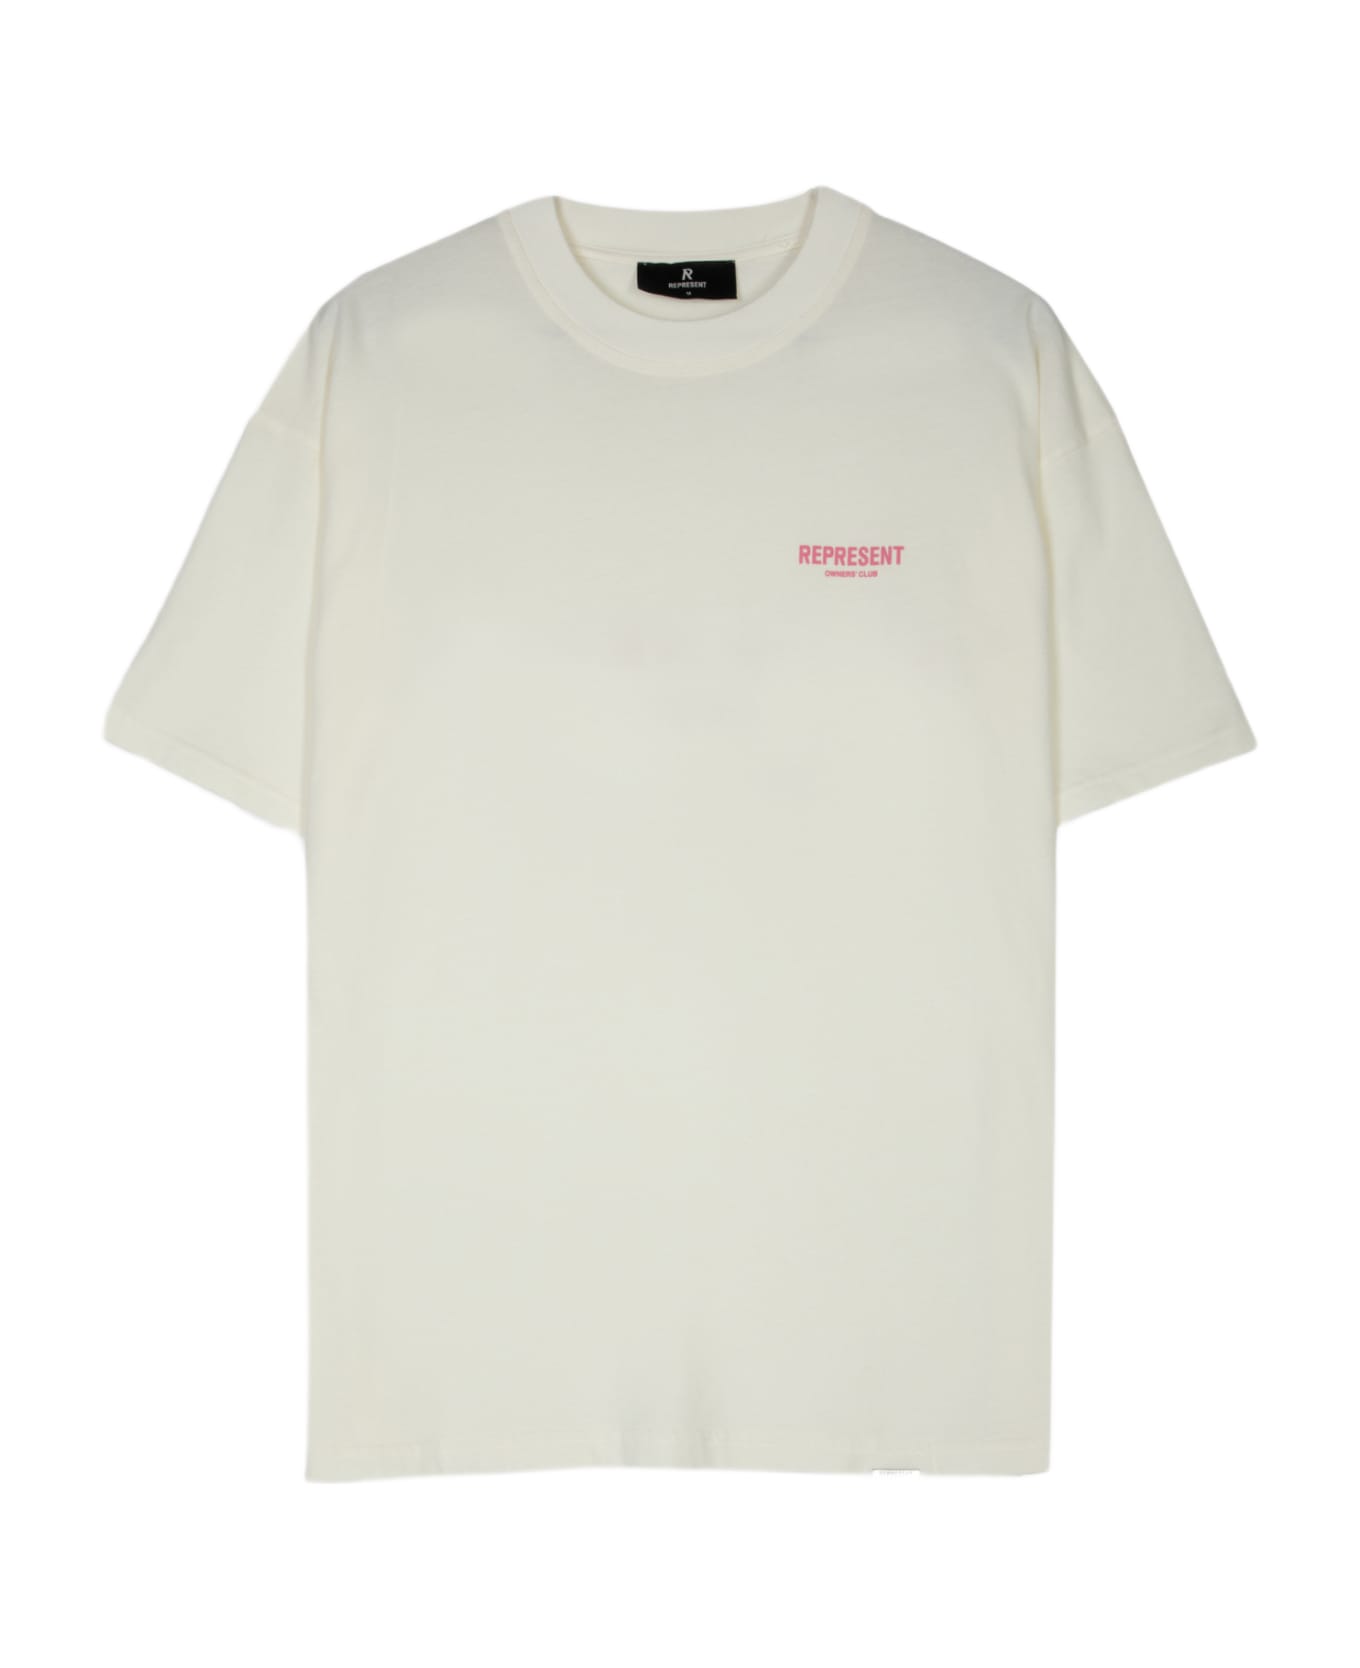 REPRESENT Owners Club T-shirt White cotton t-shirt with pink logo - Owners Club T-shirt - Bianco/rosa